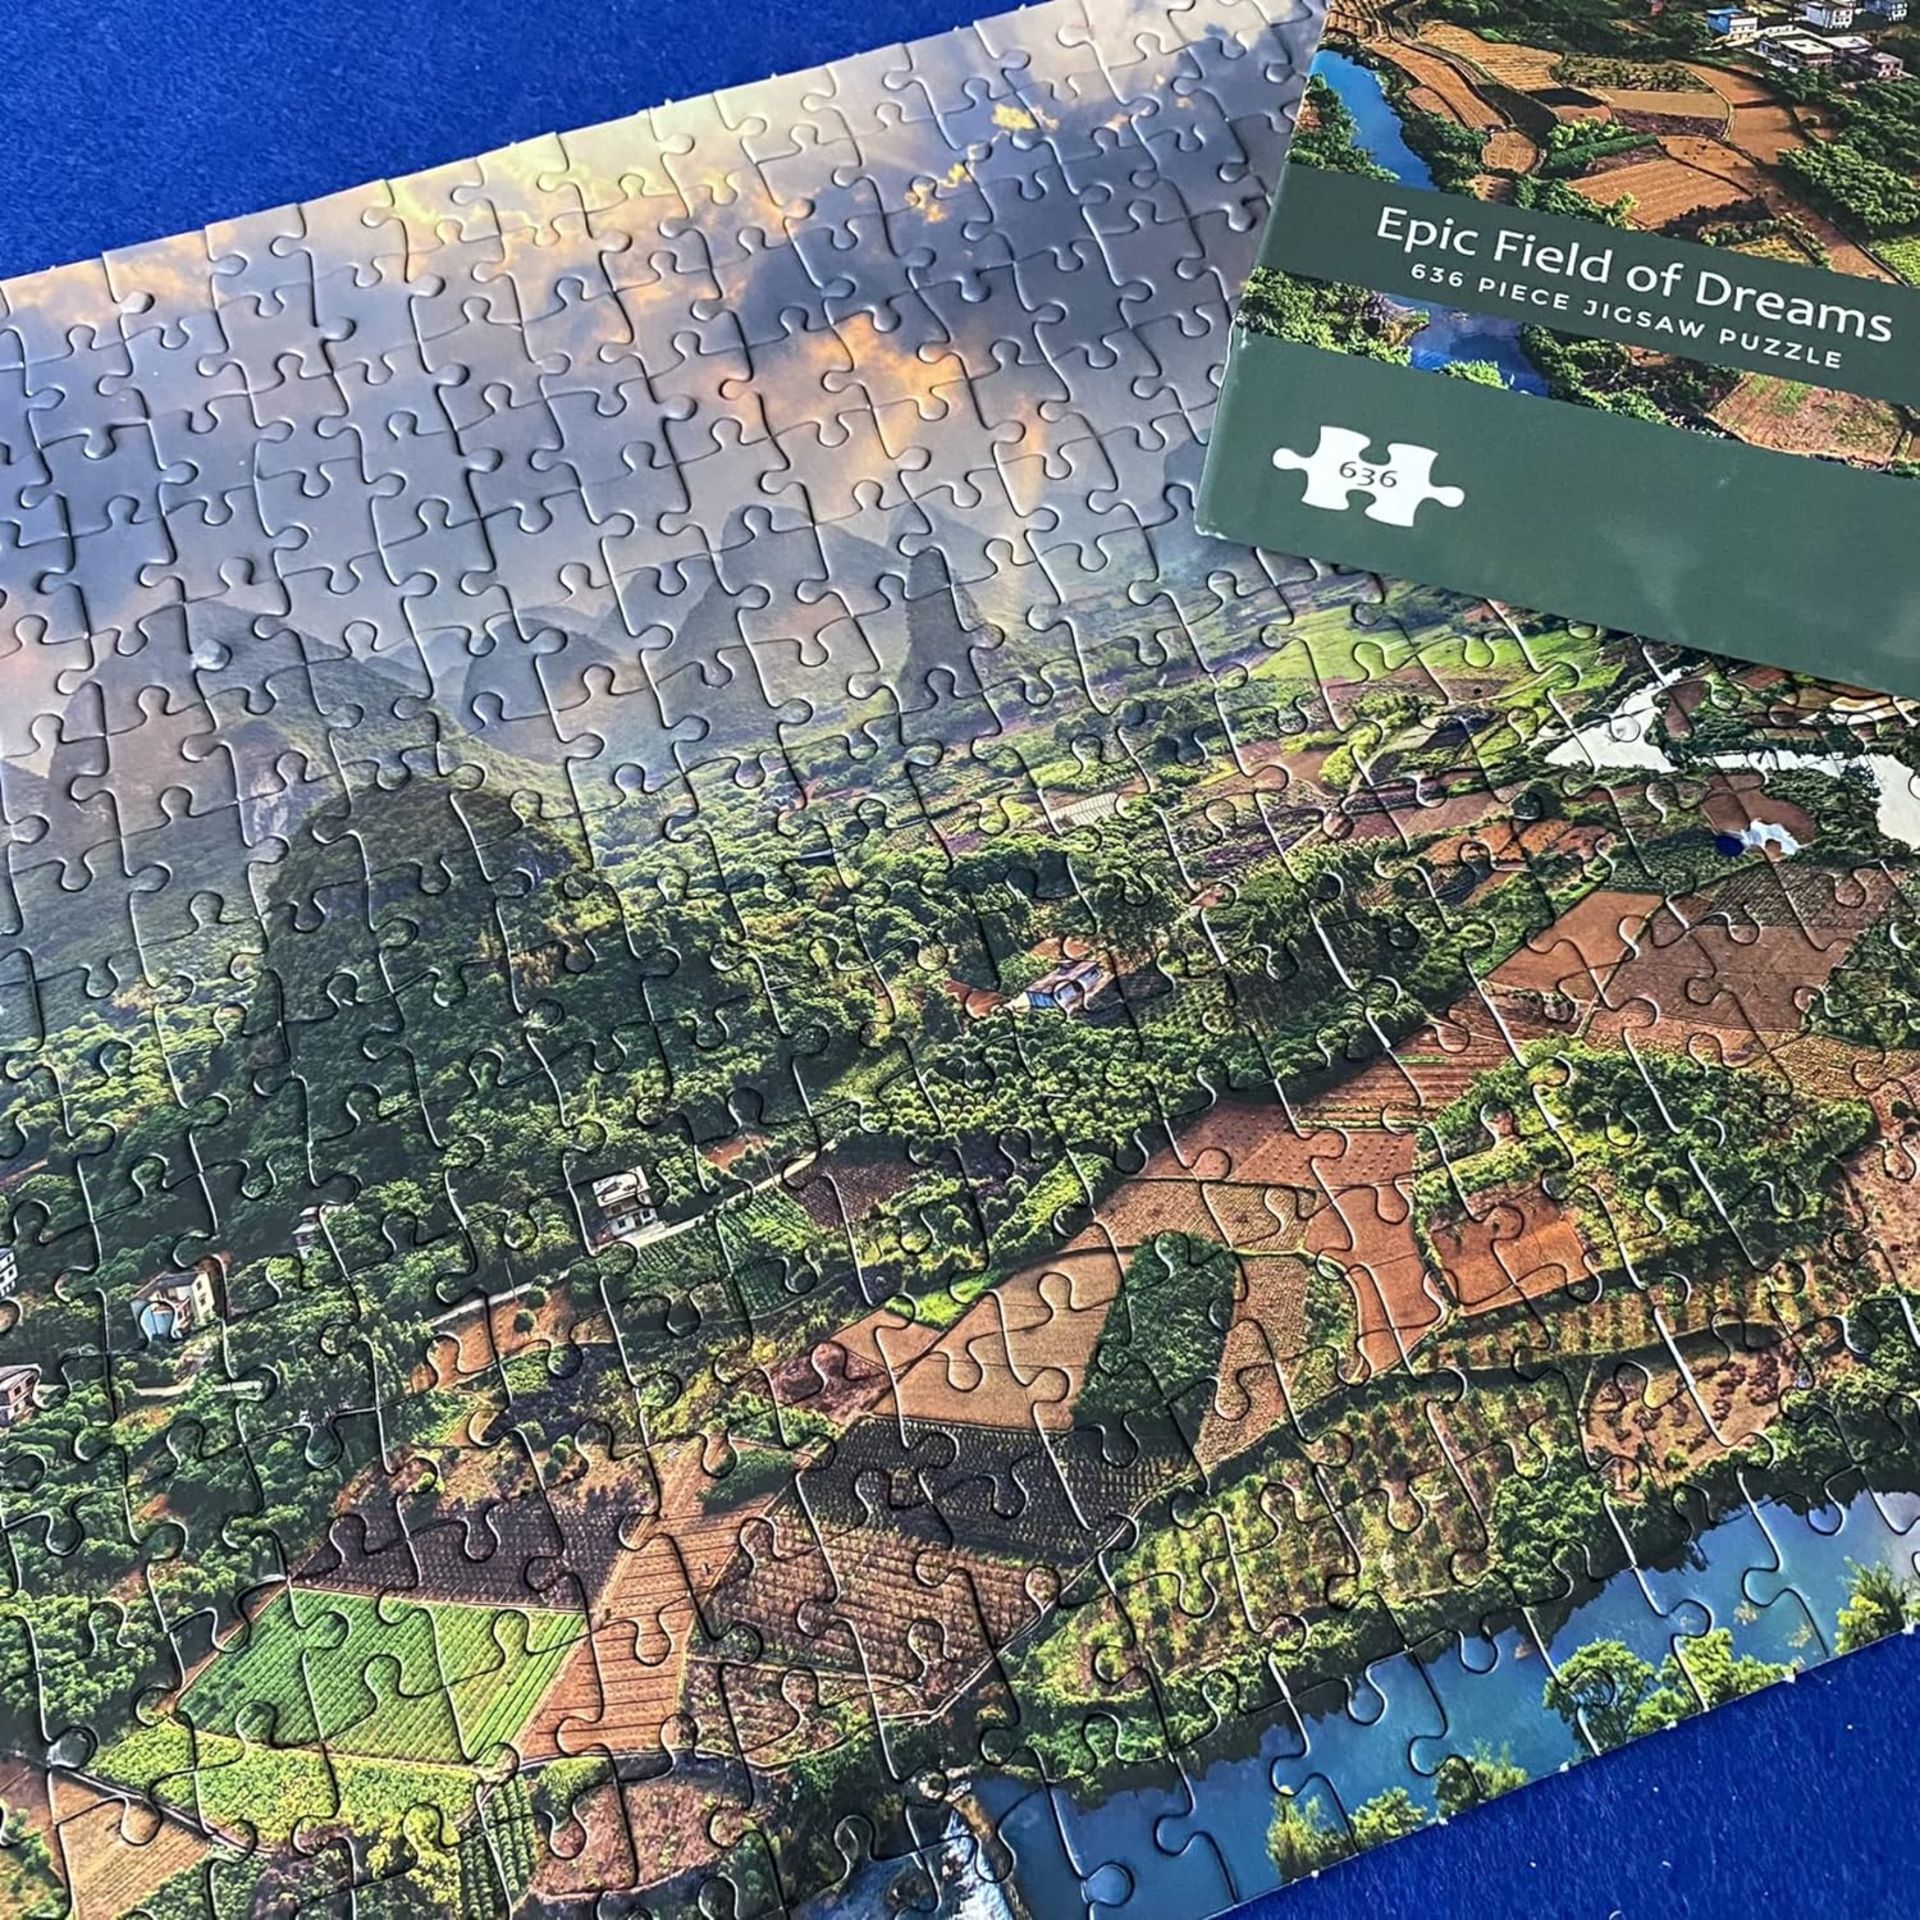 100 X NEW EPIC FIELD OF DREAMS PUZZLE (636 PR) - Image 8 of 8